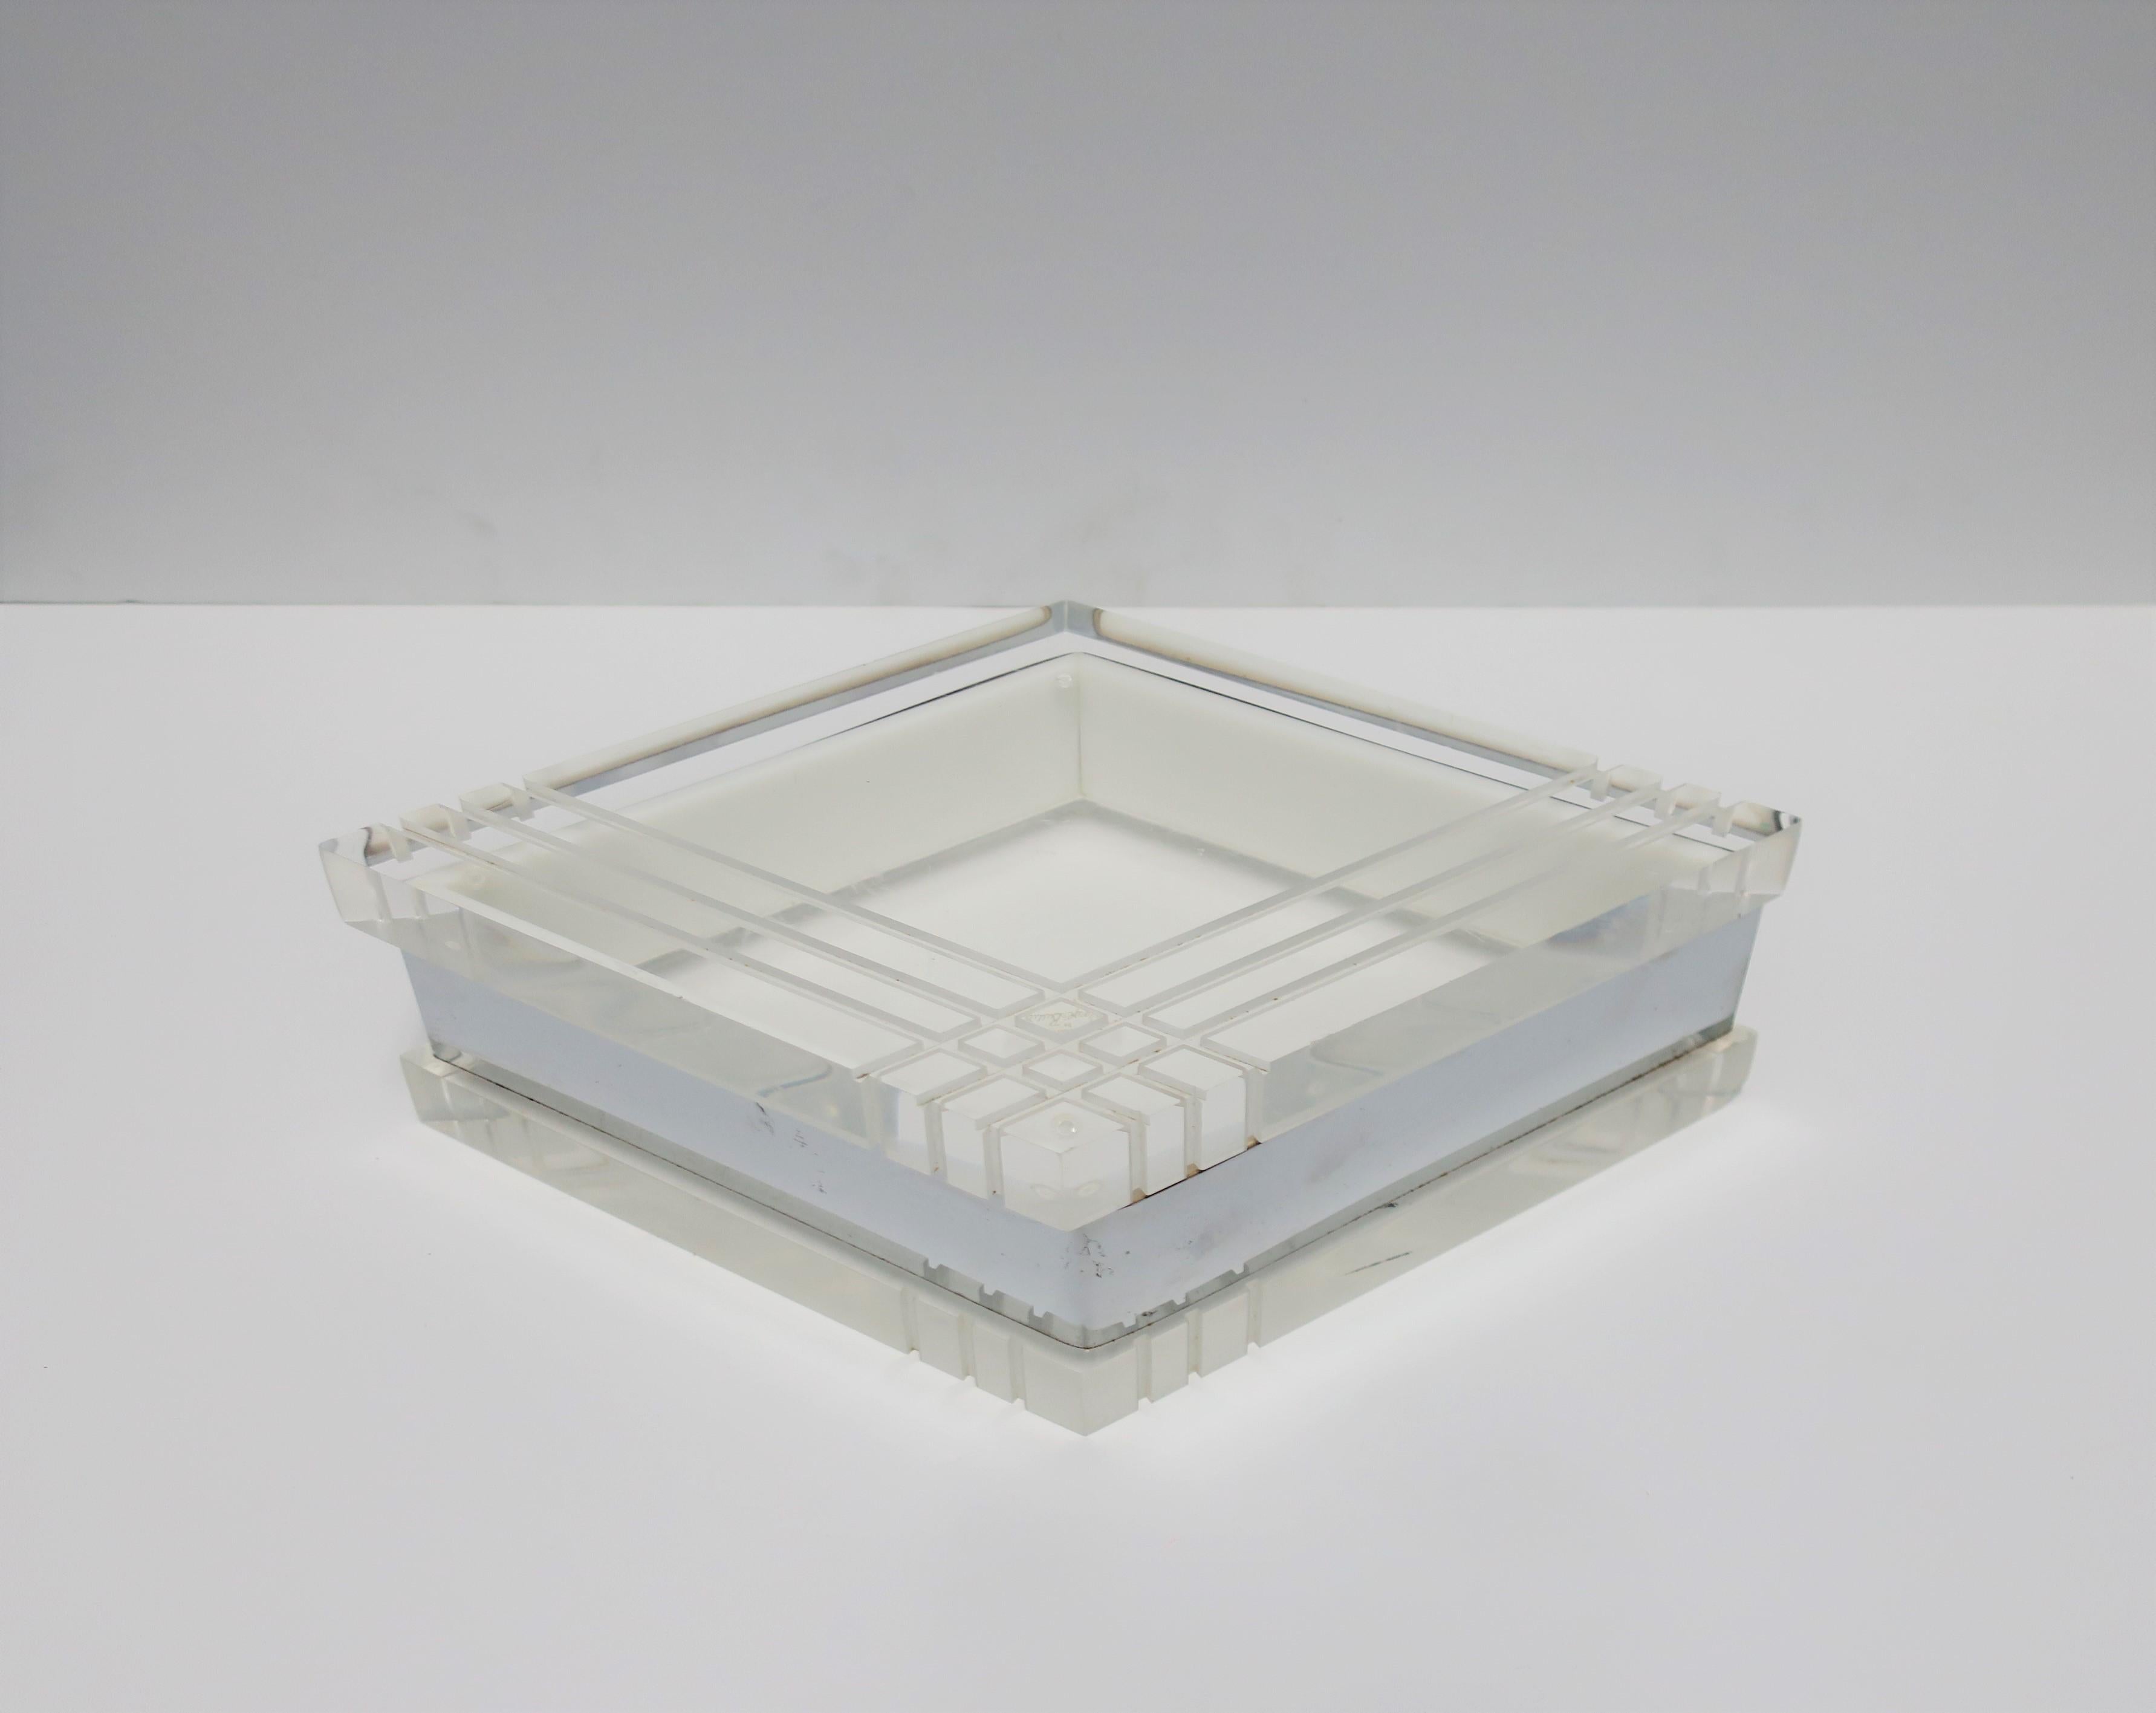 A substantial Modern style or Postmodern period marque Lucite and chrome jewelry or storage box by designer George Bullitt, circa late 1970s-1980s. Lucite top and base are 1